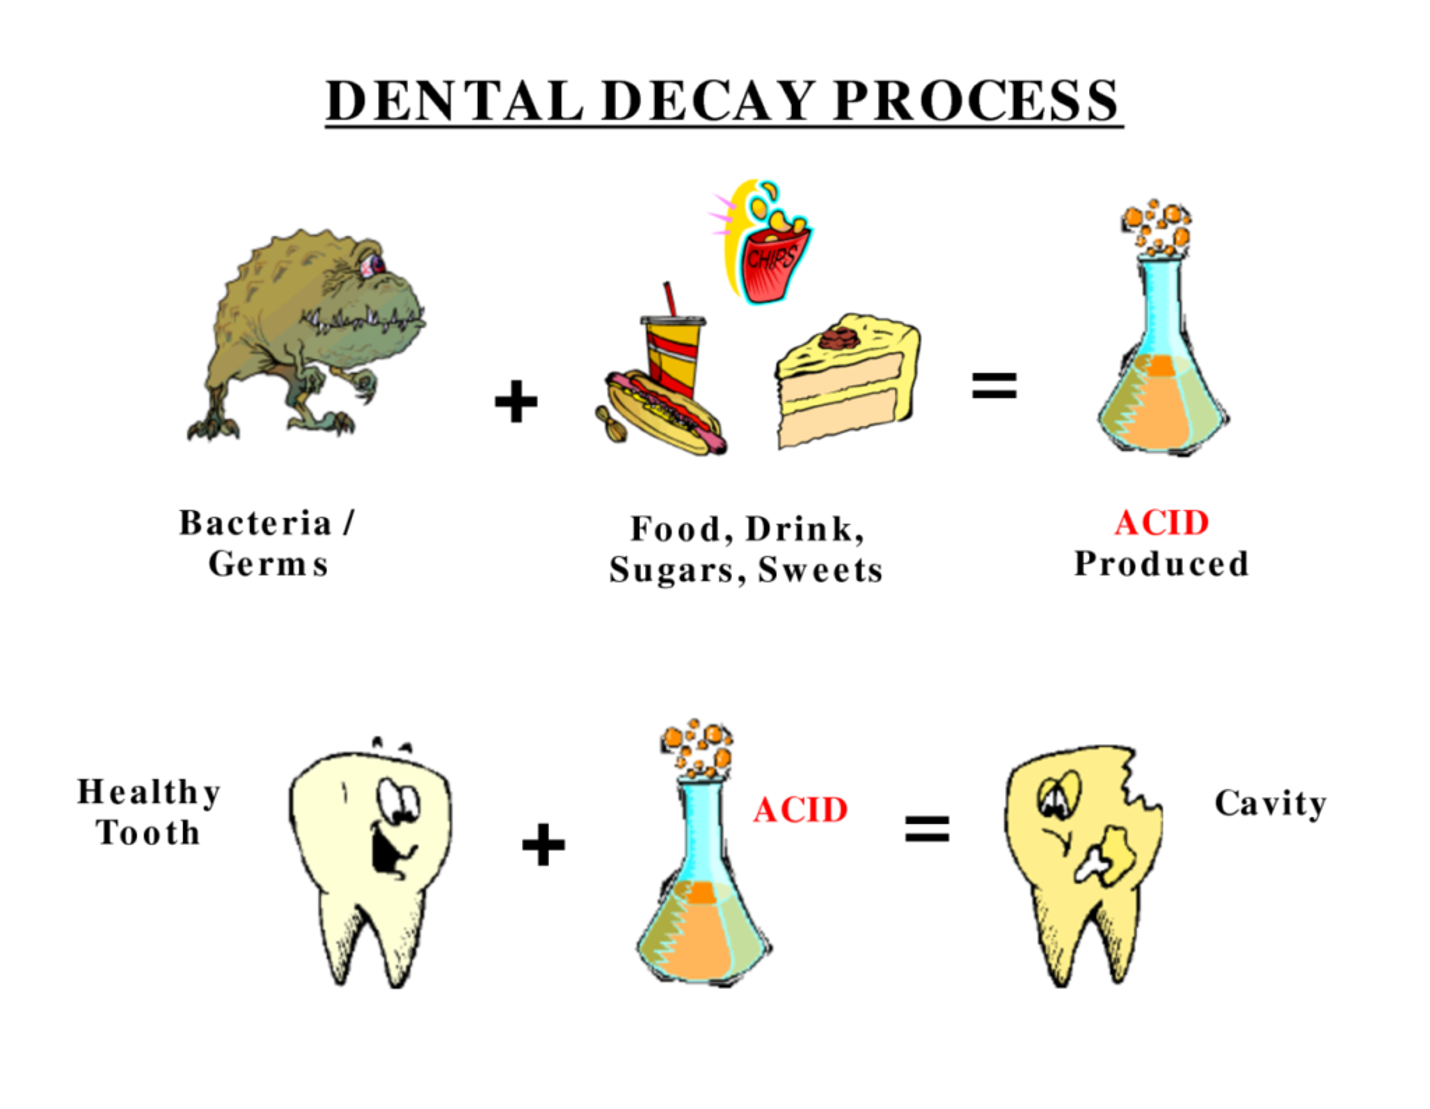 A picture containing diagram showing dental decay process